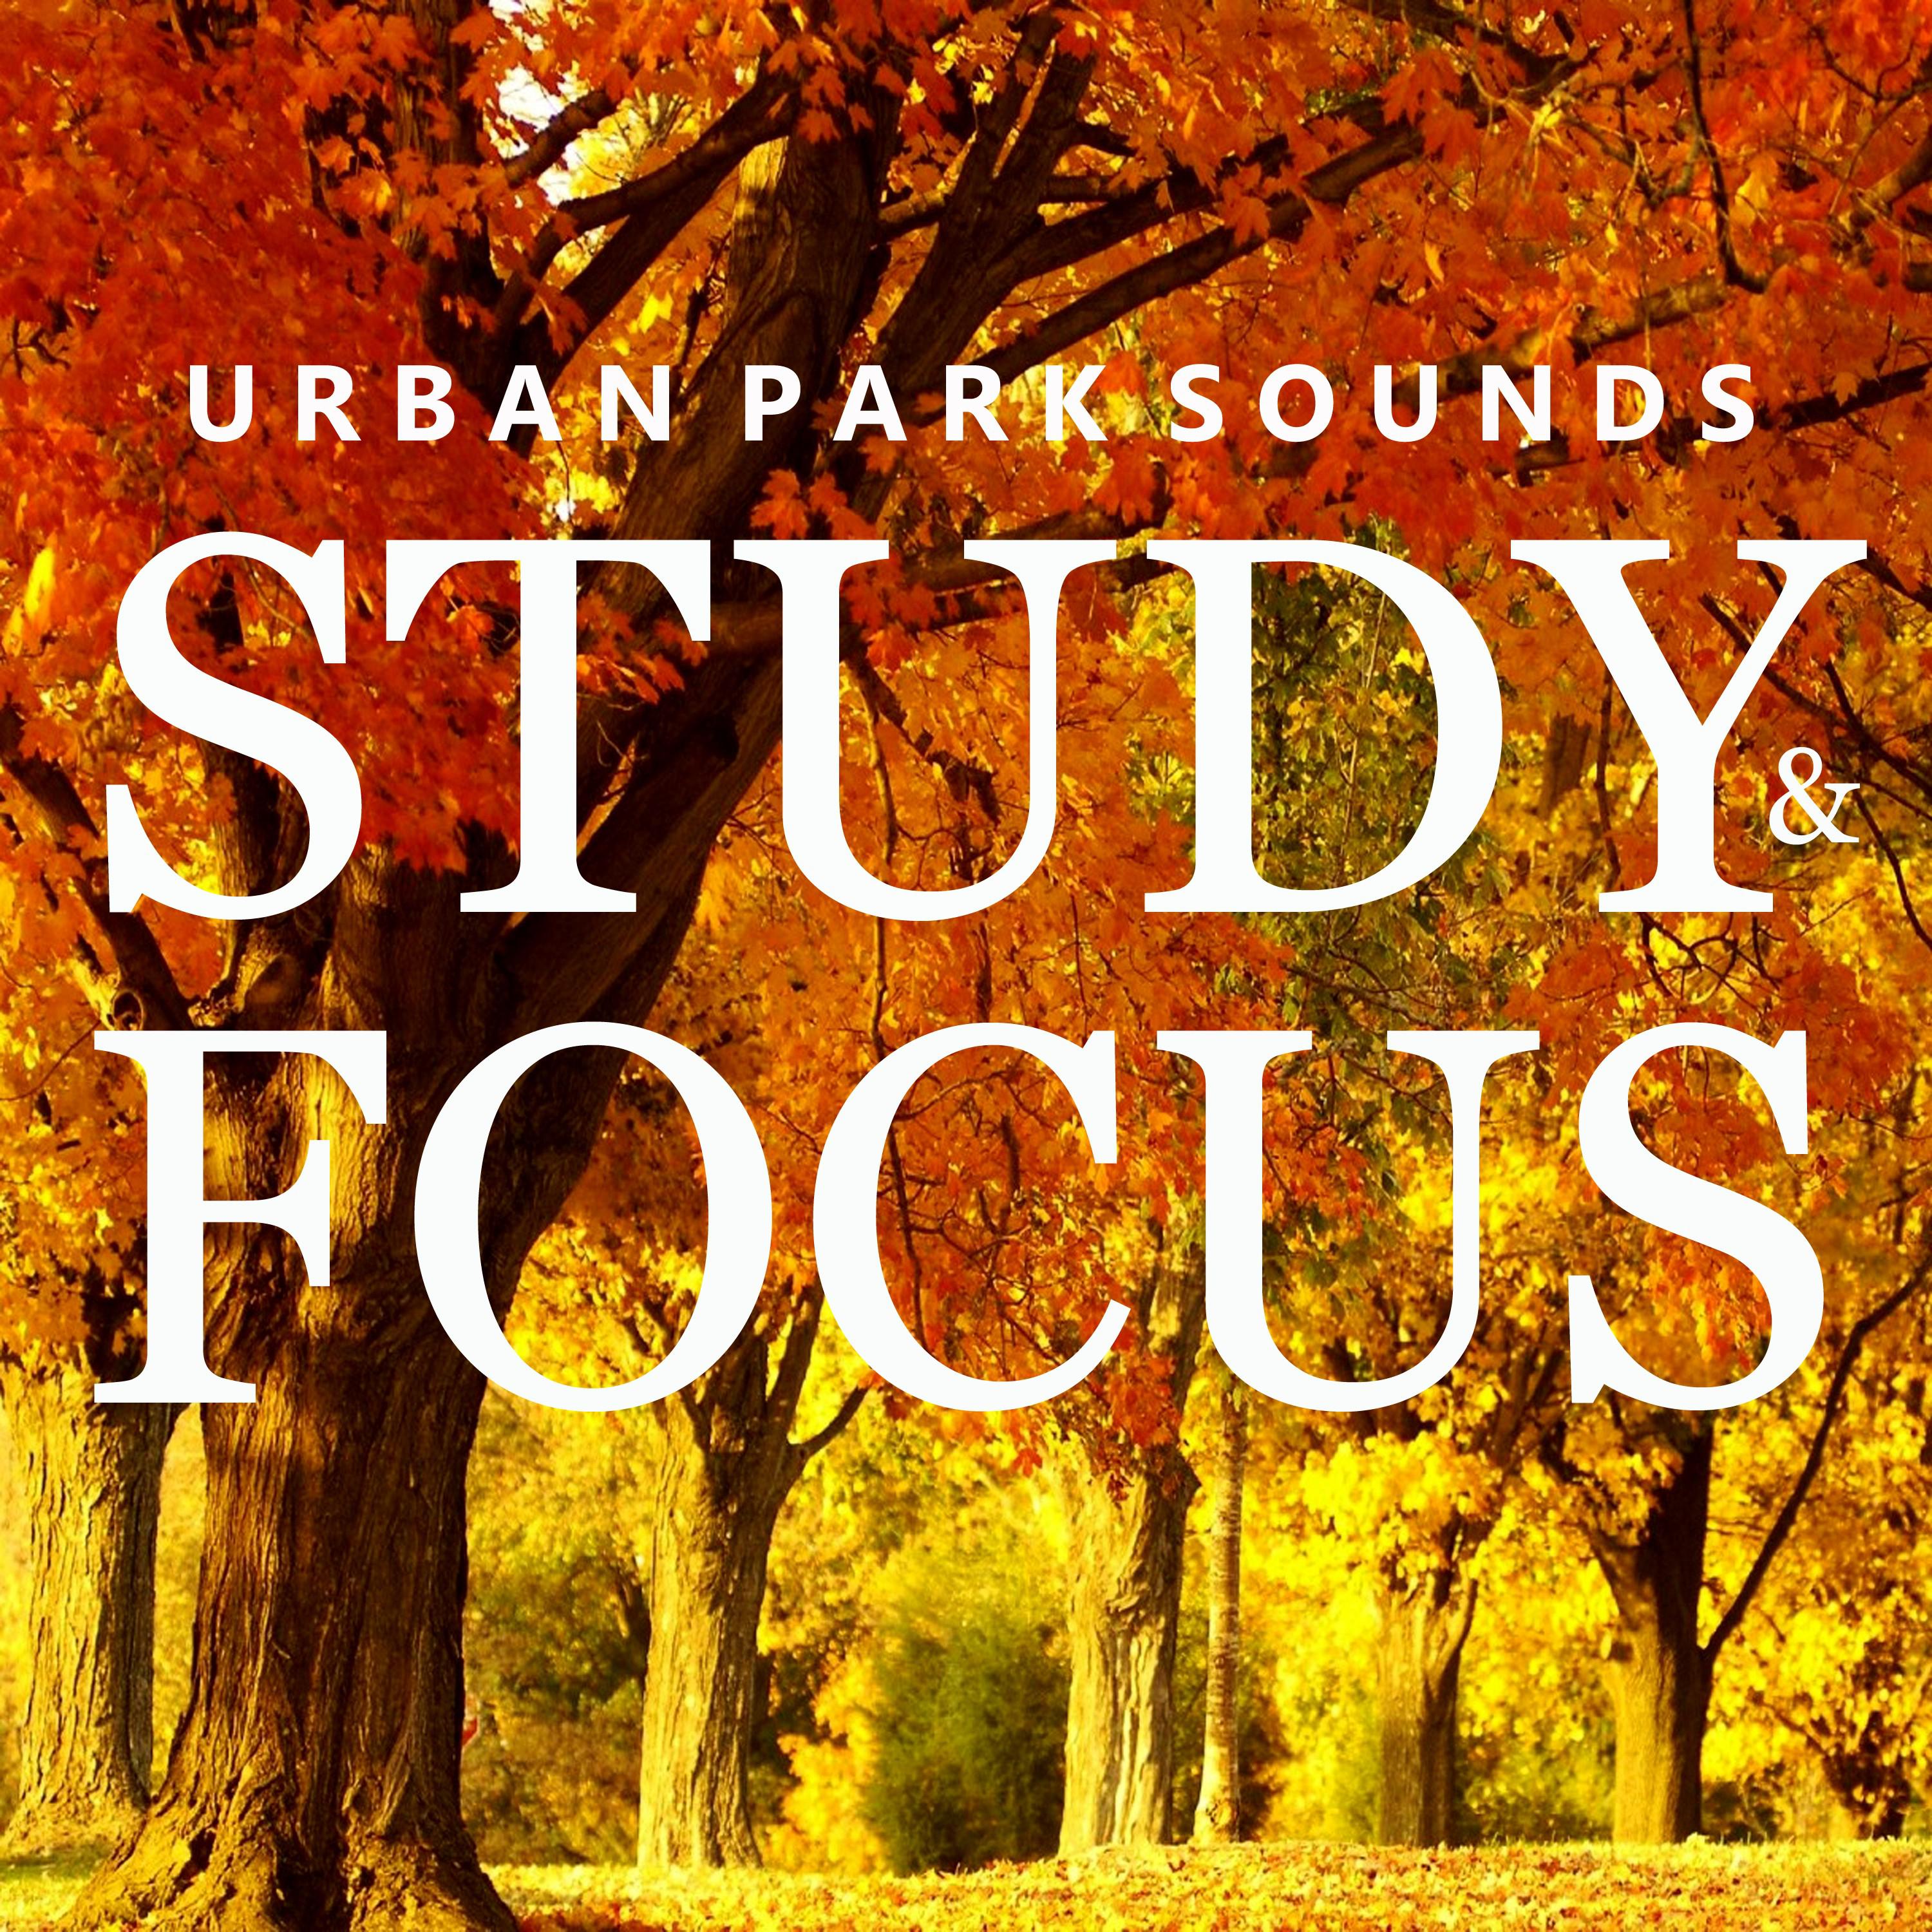 Urban Park Sounds for Studying, Pt. 08